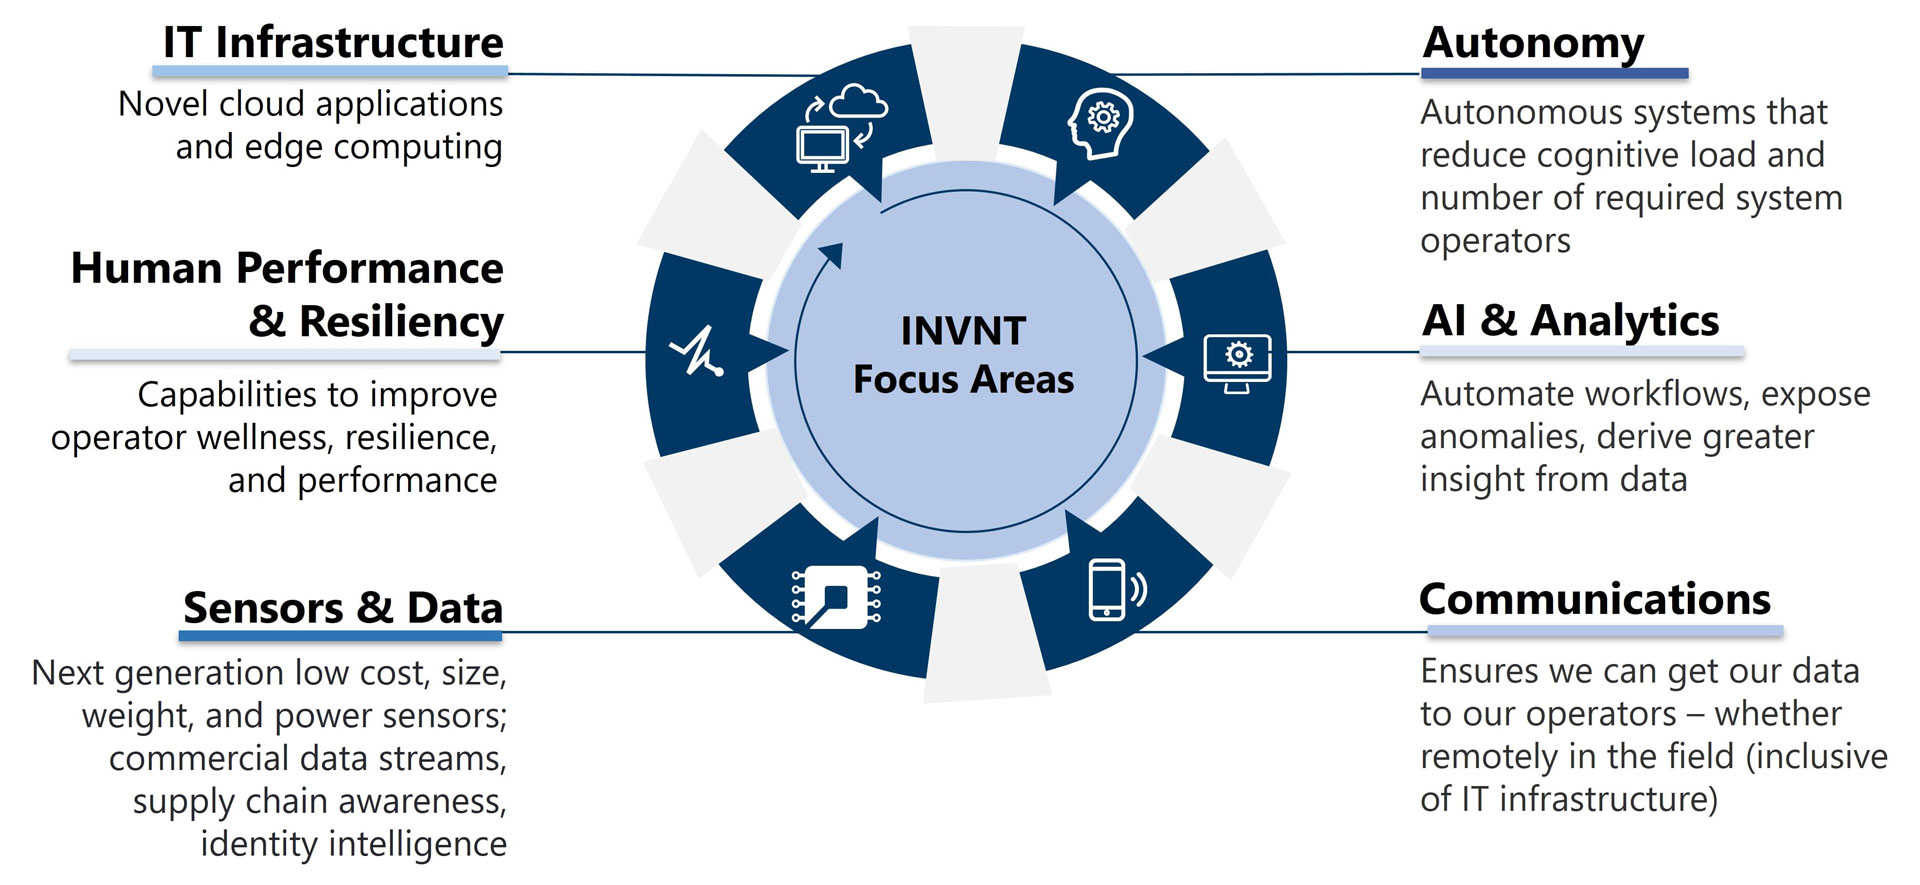 This graphic depicts a circular chart outlining the CBP Innovation Team’s focus areas. Each focus area has its own icon. The focus areas are listed as follows: IT Infrastructure: Novel cloud applications and edge computing Human Performance and Resiliency: Capabilities to improve operator wellness, resilience, and performance Sensors and Data: Next generation low cost, size, weight, and power sensors; commercial data streams, supply chain awareness, identity intelligence Autonomy: Autonomous systems that reduce cognitive load and number of required system operators. AI & Analytics: Automate workflows, expose anomalies, derive greater insight from data.
Communications: Ensures we can get our data to our operators – whether remotely in the field (inclusive of IT infrastructure)